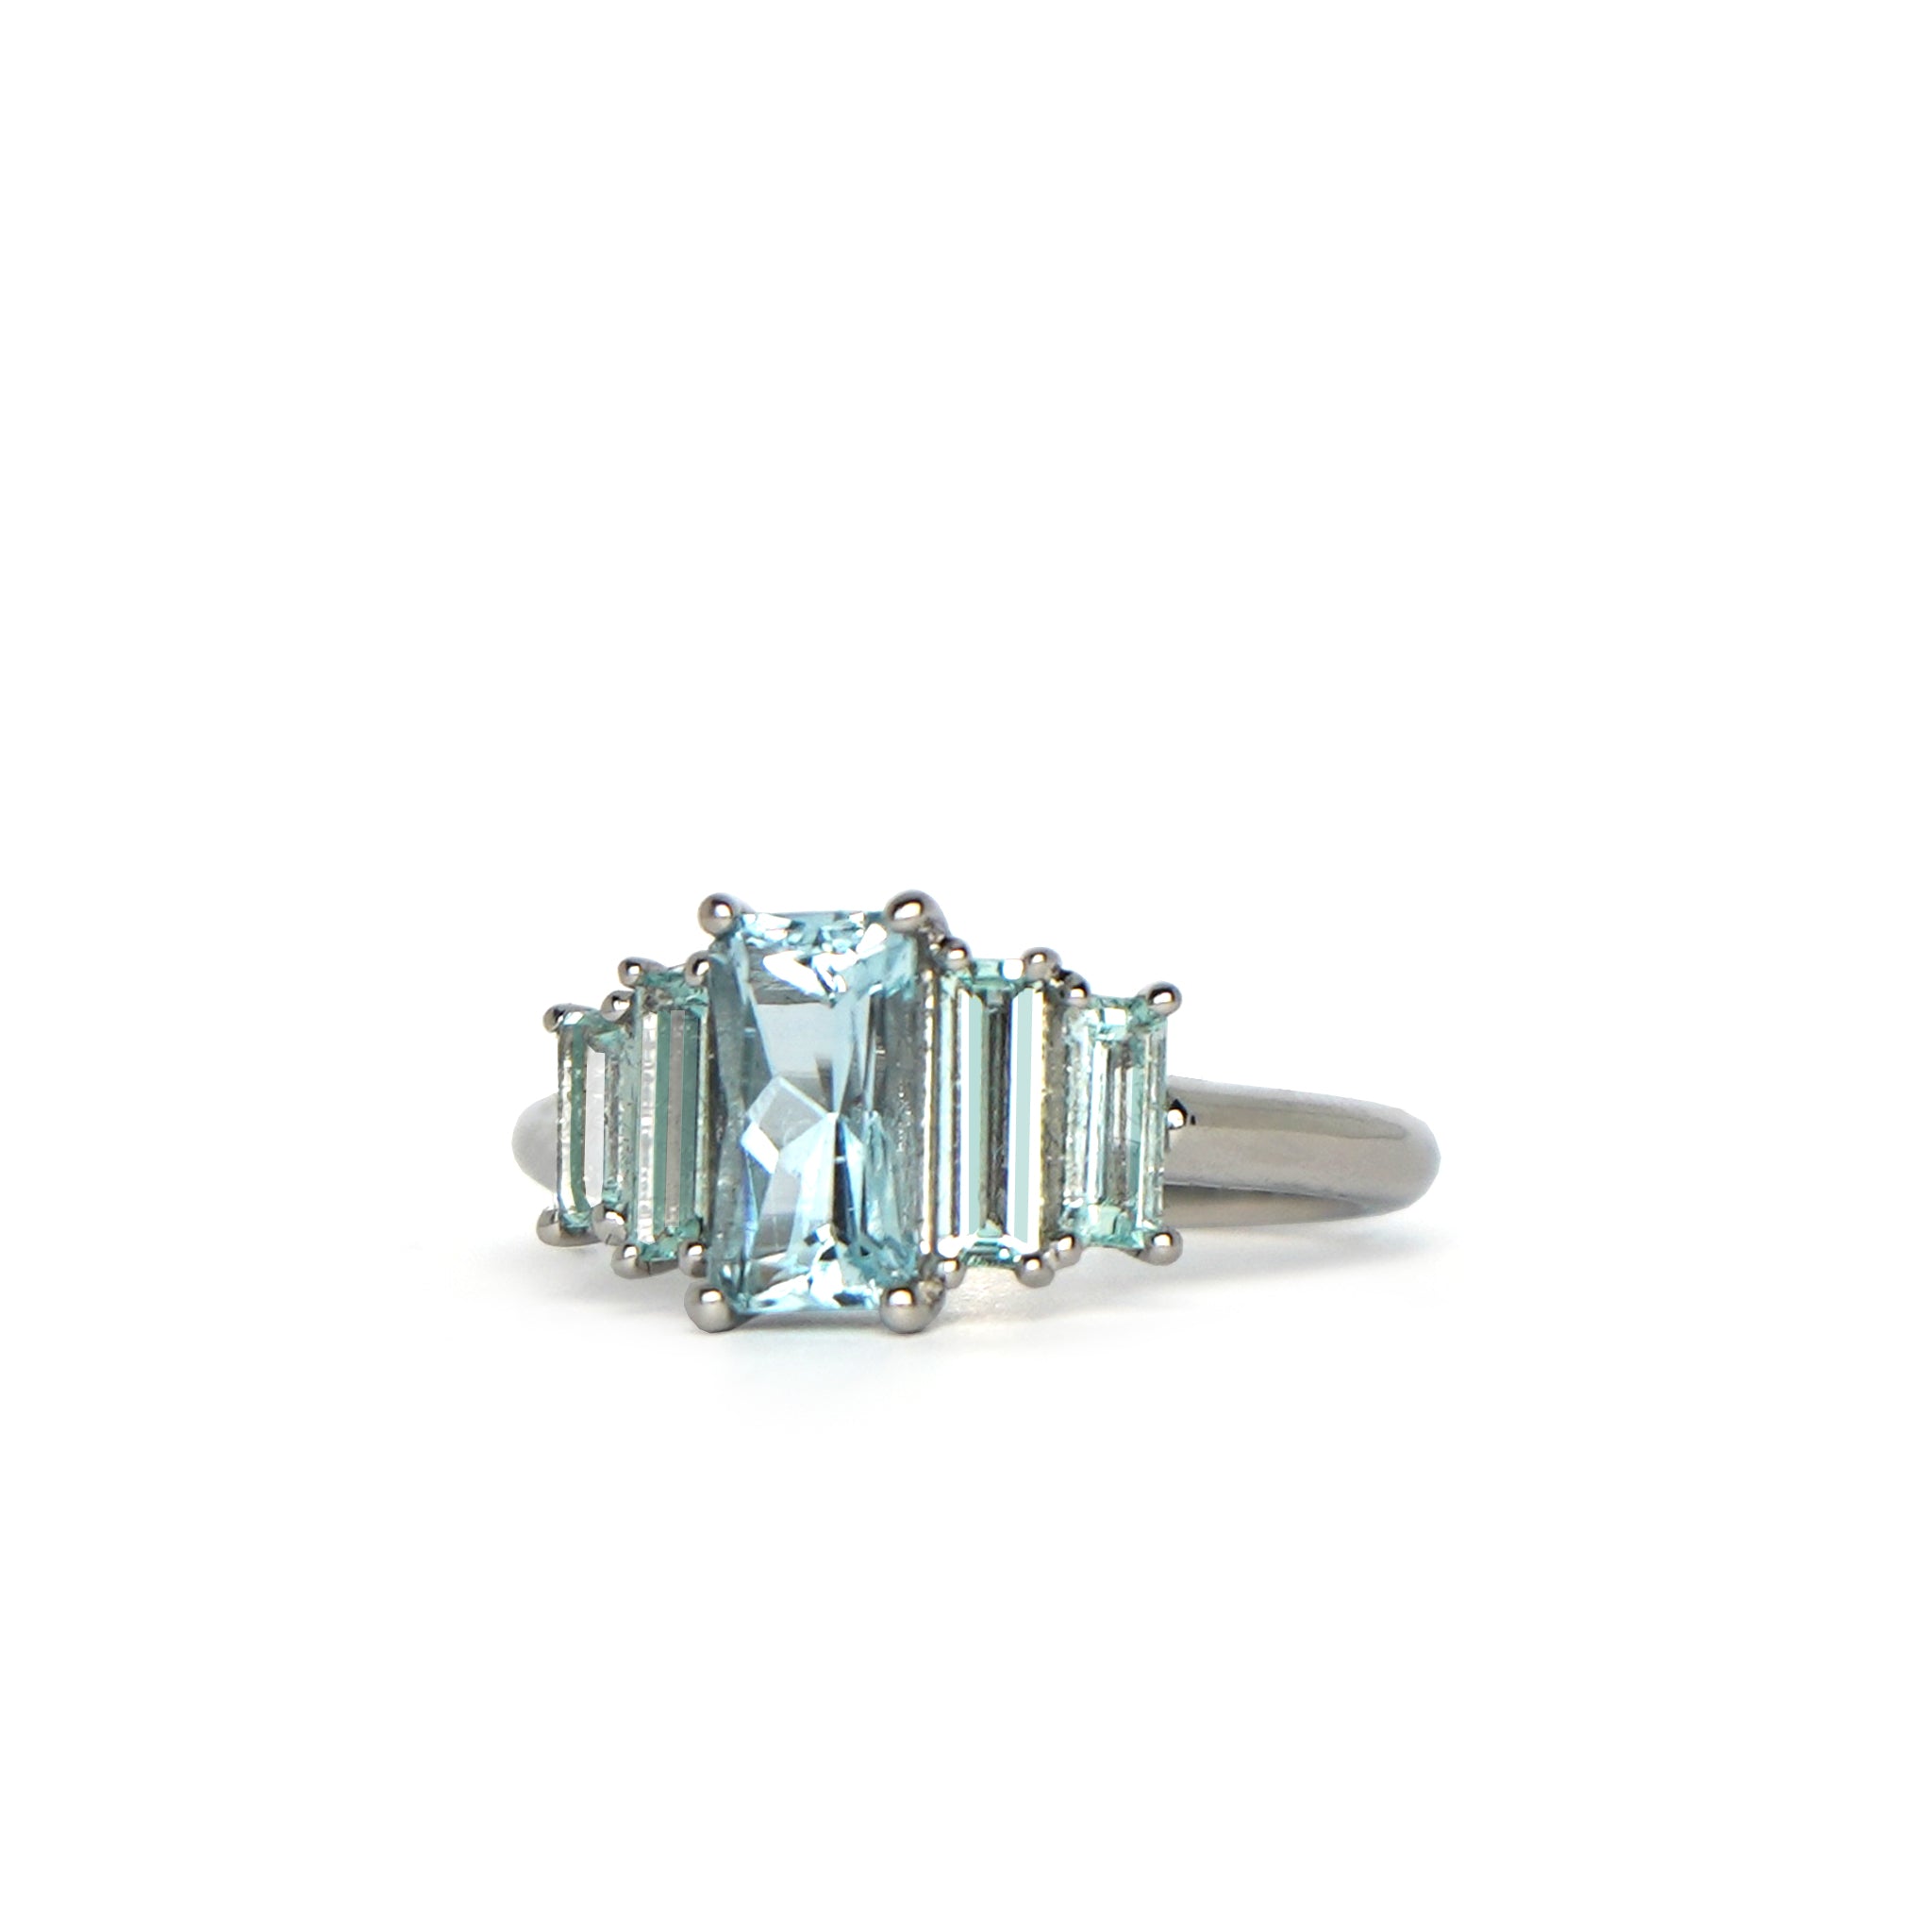 Side view of Marine Deco Ring with aquamarine gemstones set in platinum, one-of-a-kind piece from Lico Jewelry